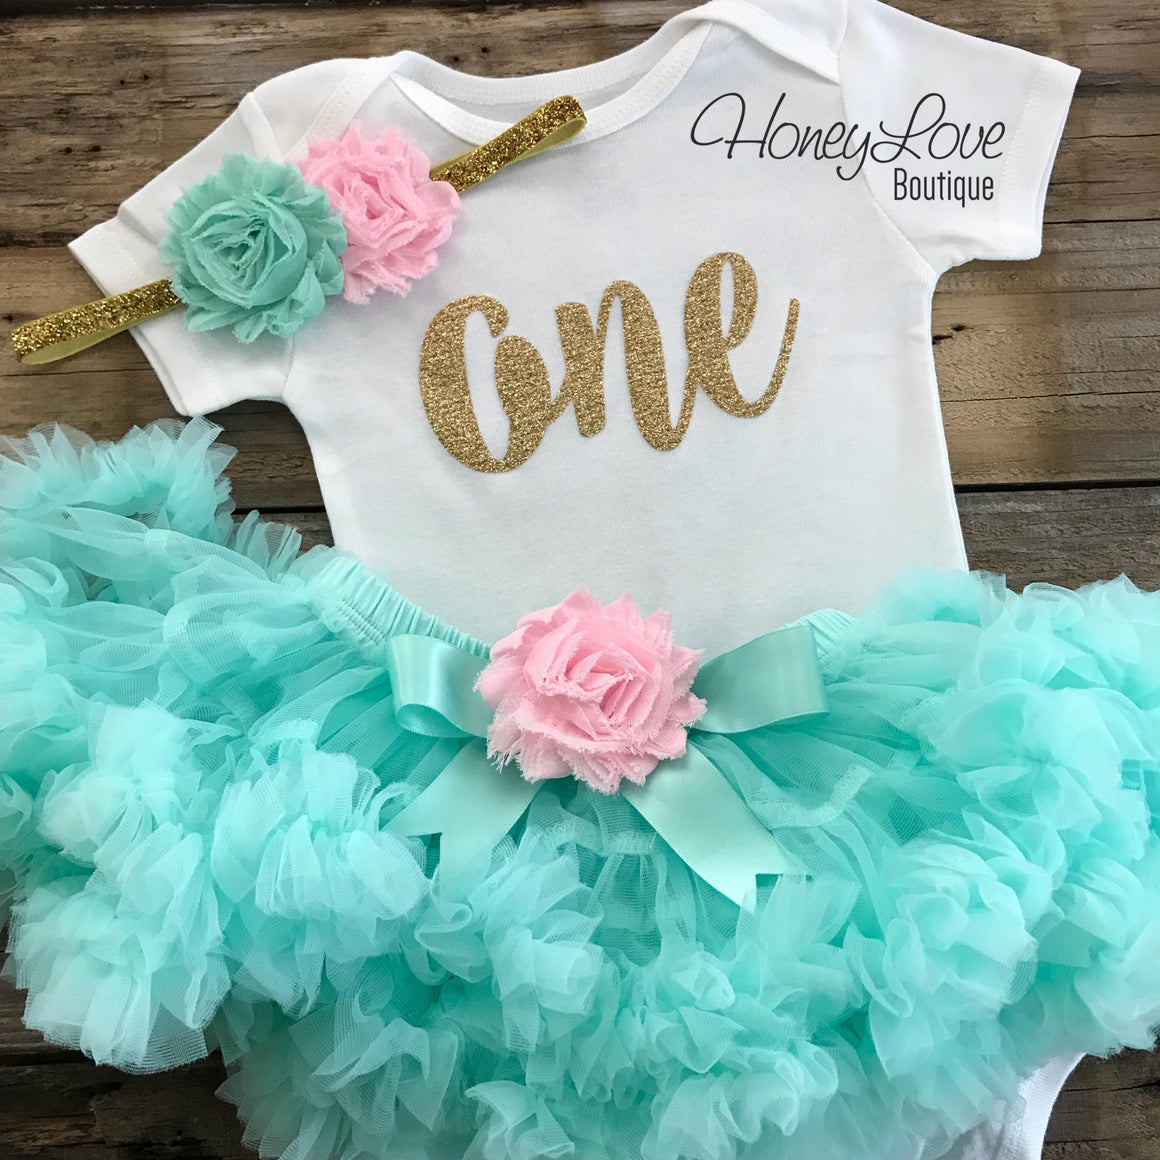 One - Birthday Outfit - Mint/Aqua, Light Pink and Silver/Gold glitter - HoneyLoveBoutique